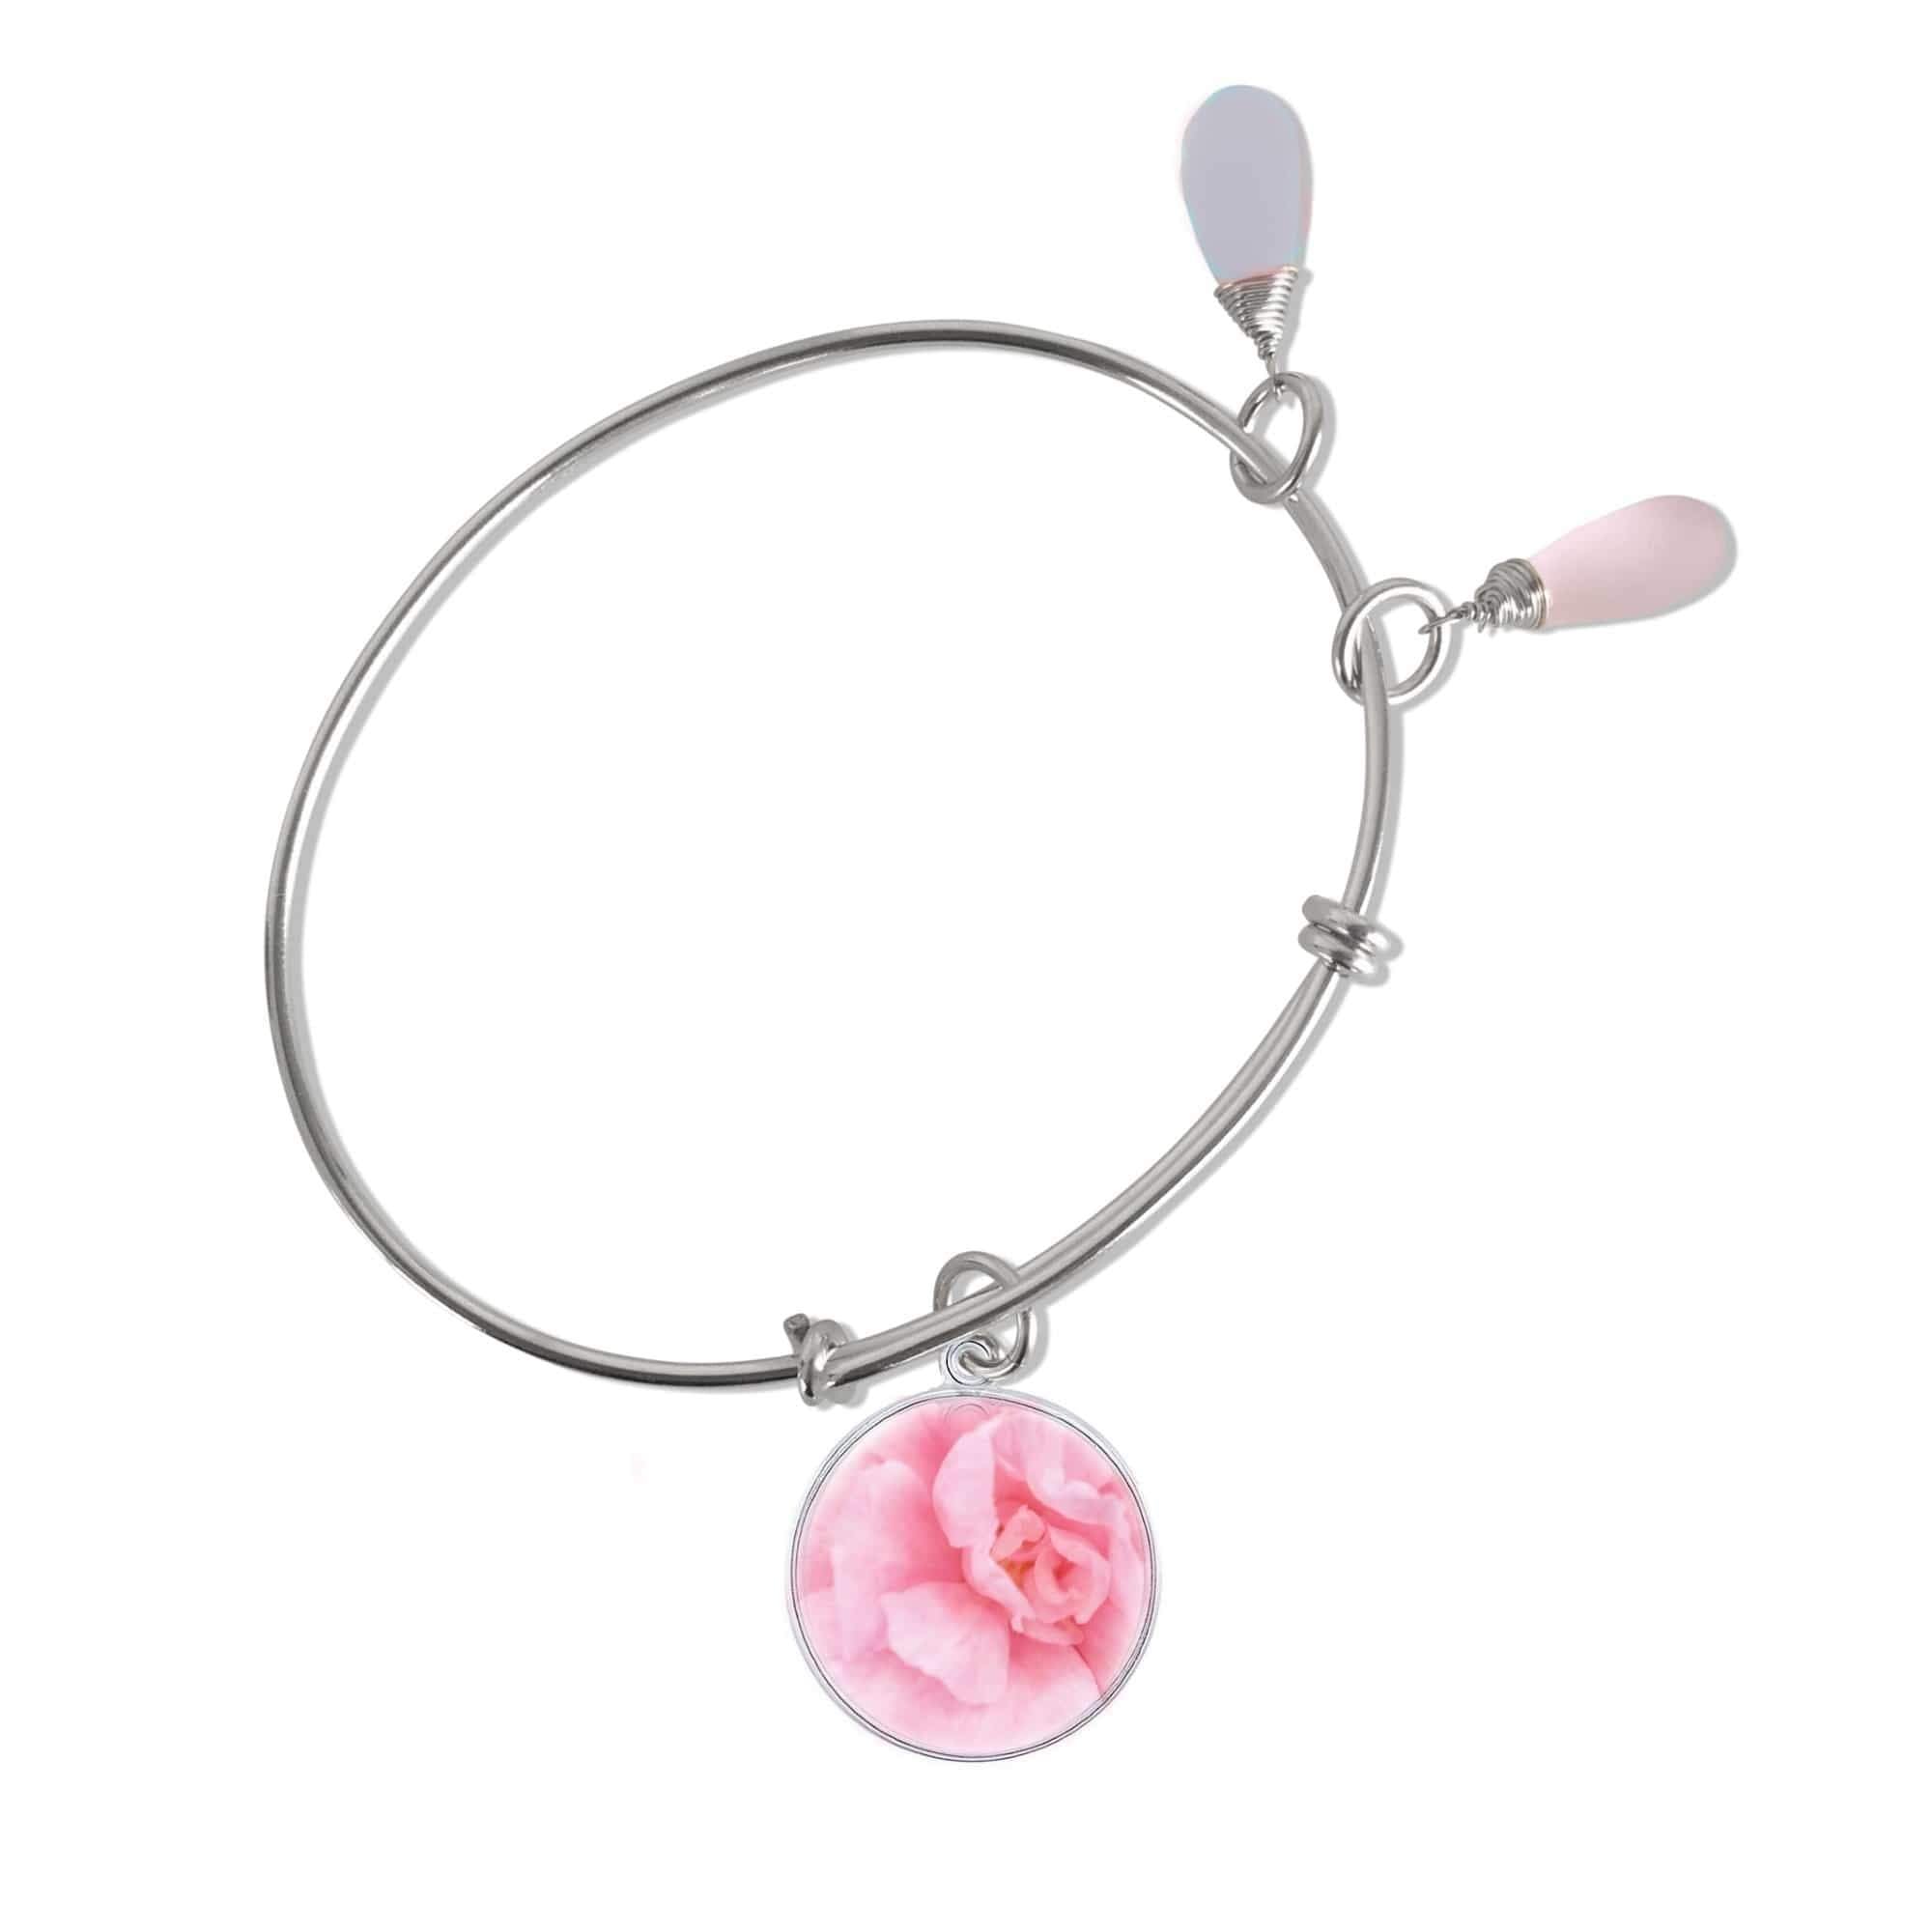 Pink Rose Bangle by Tiffany Reed Briley